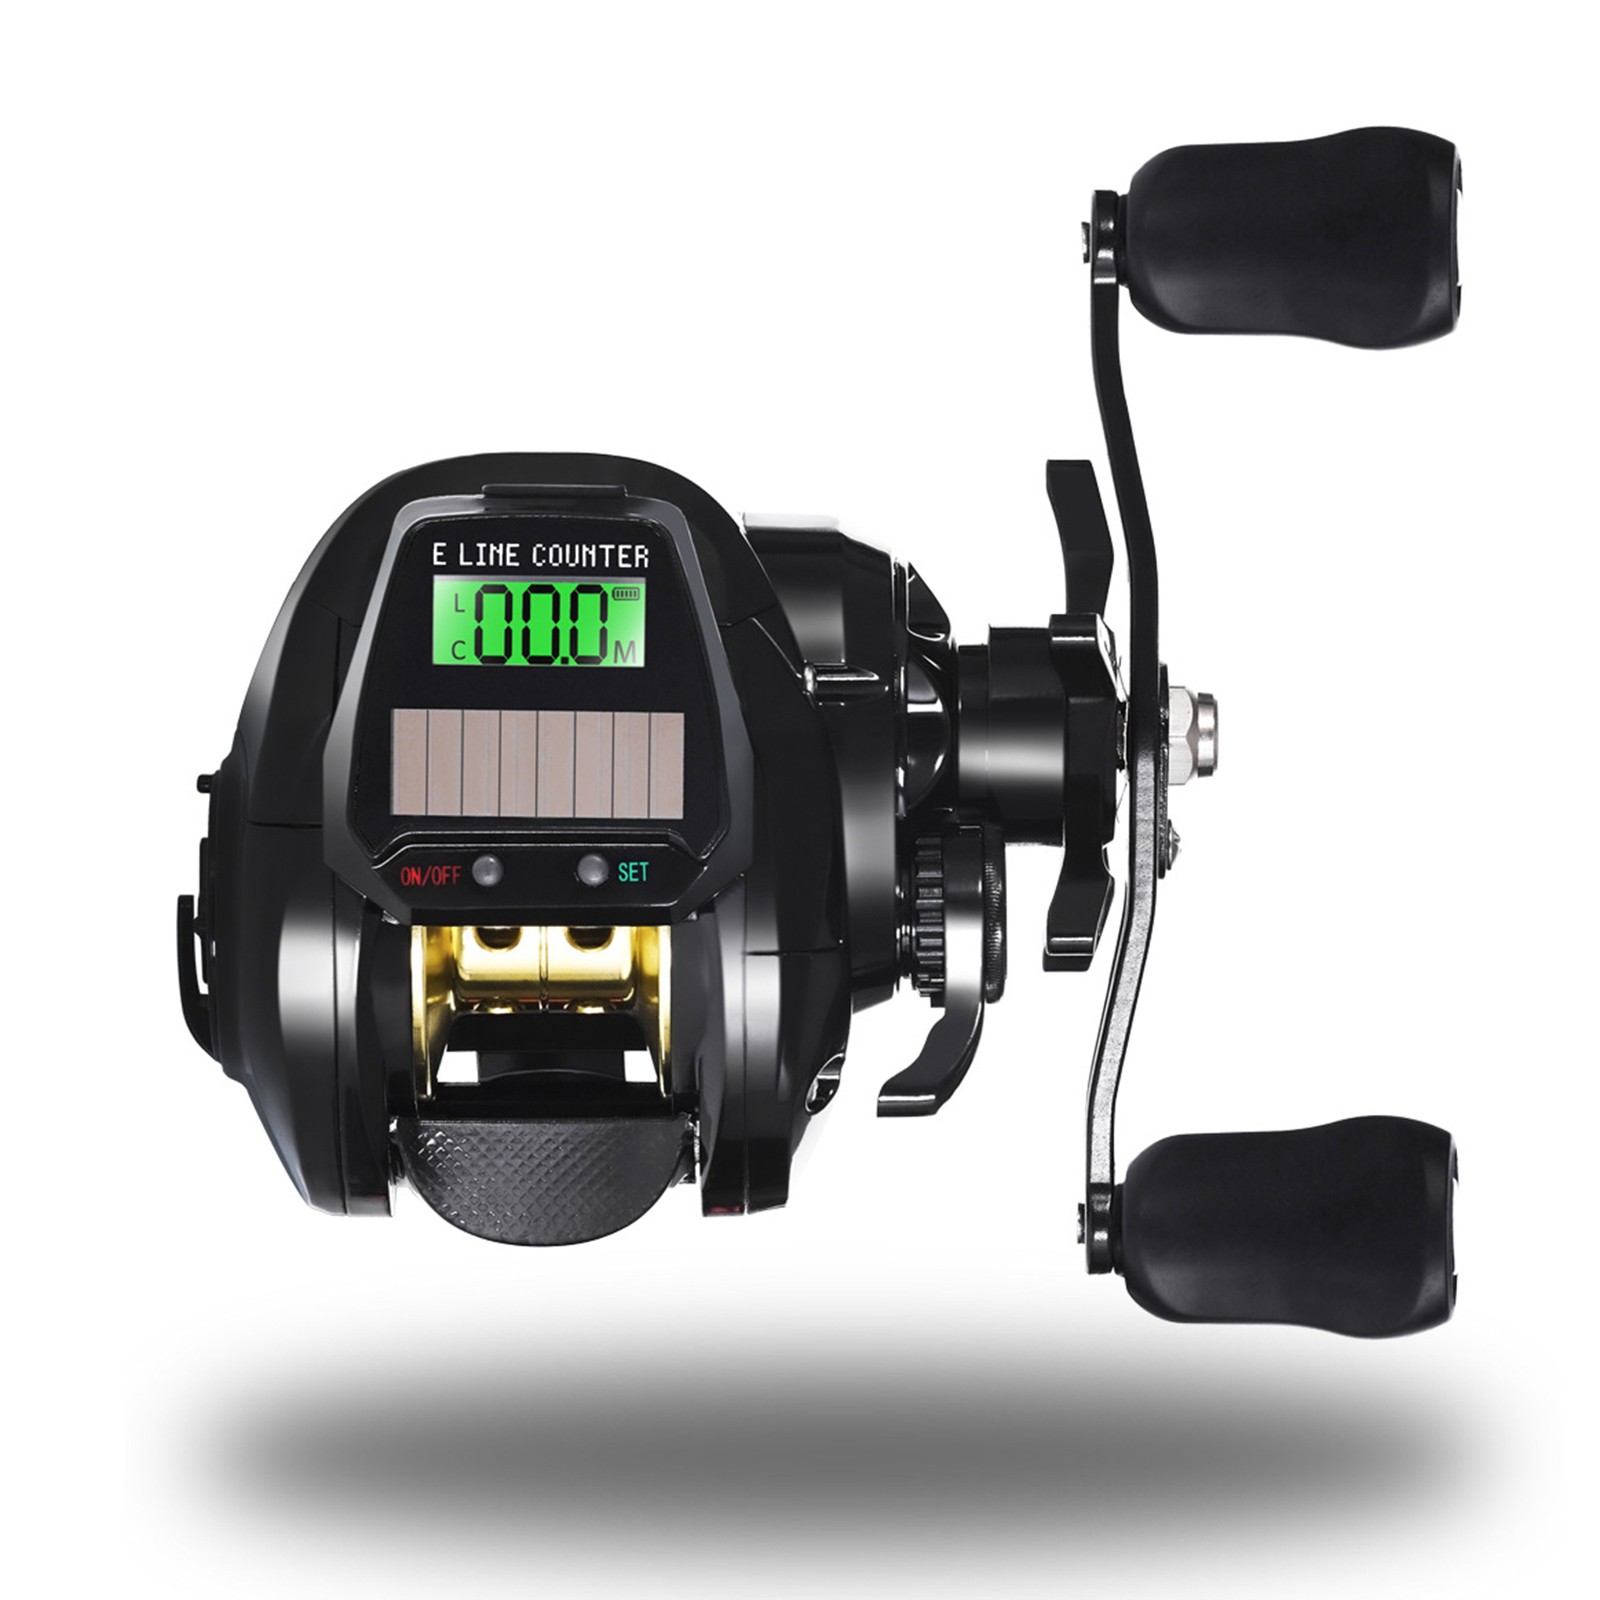 Compact Solar Fishing Reel with Line Counter High Gear Ratio Digital Display